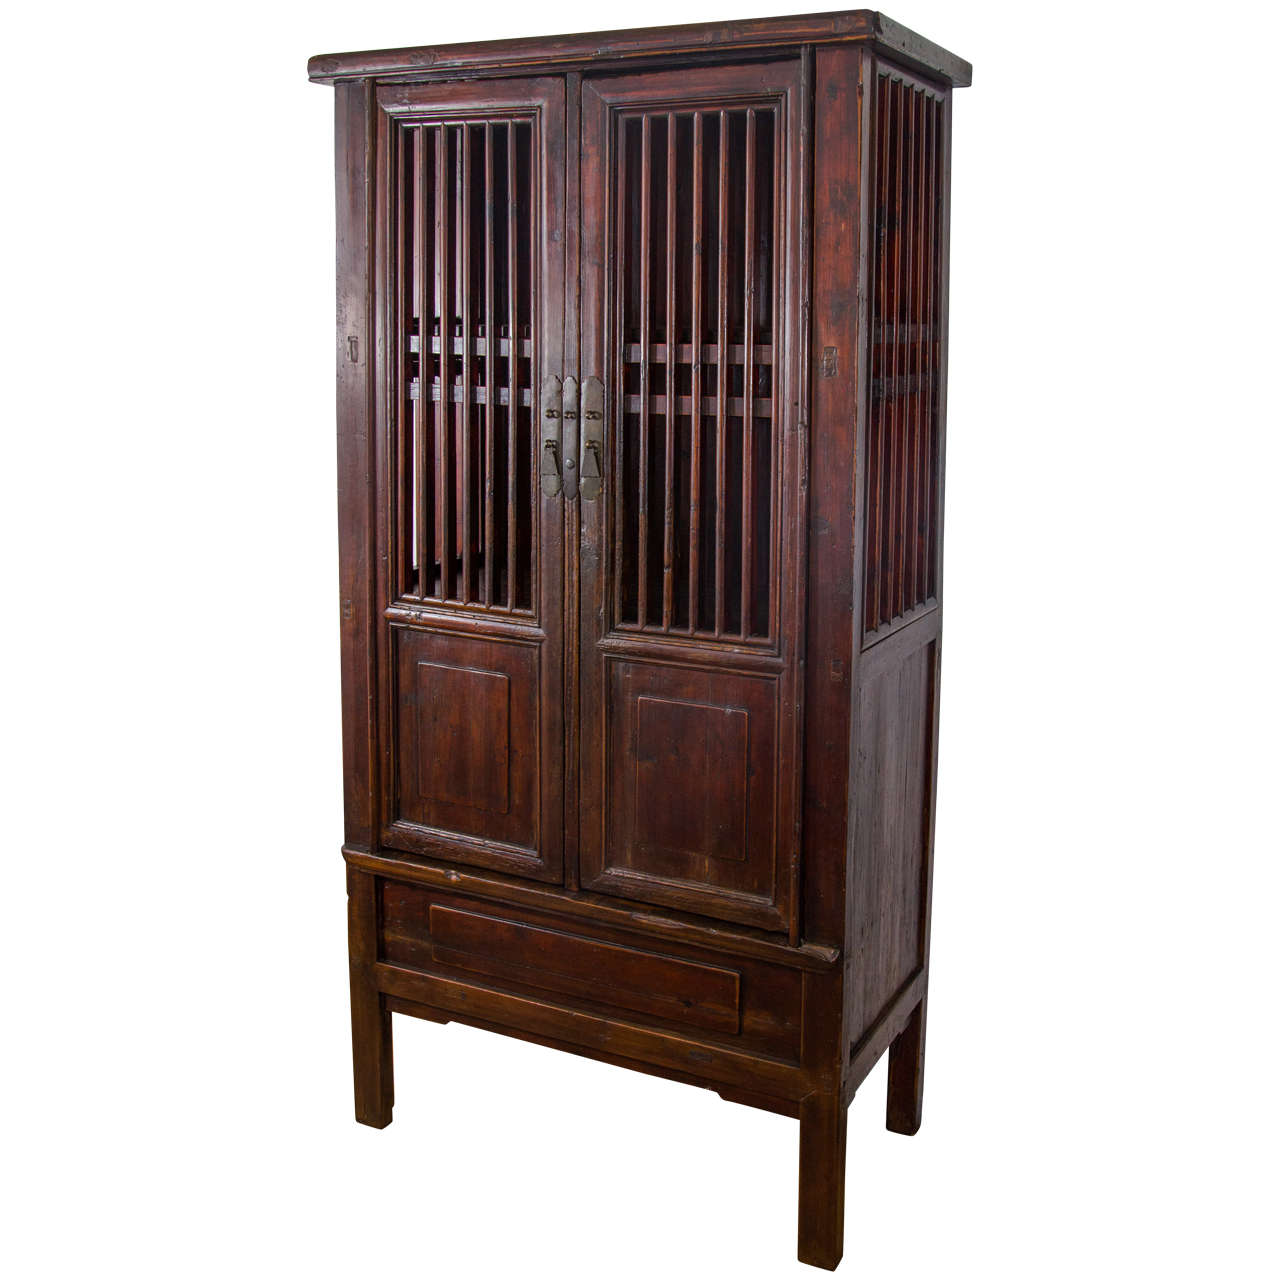 19th Century Tall Chinese Fruit or Vegetable Storage Cabinet